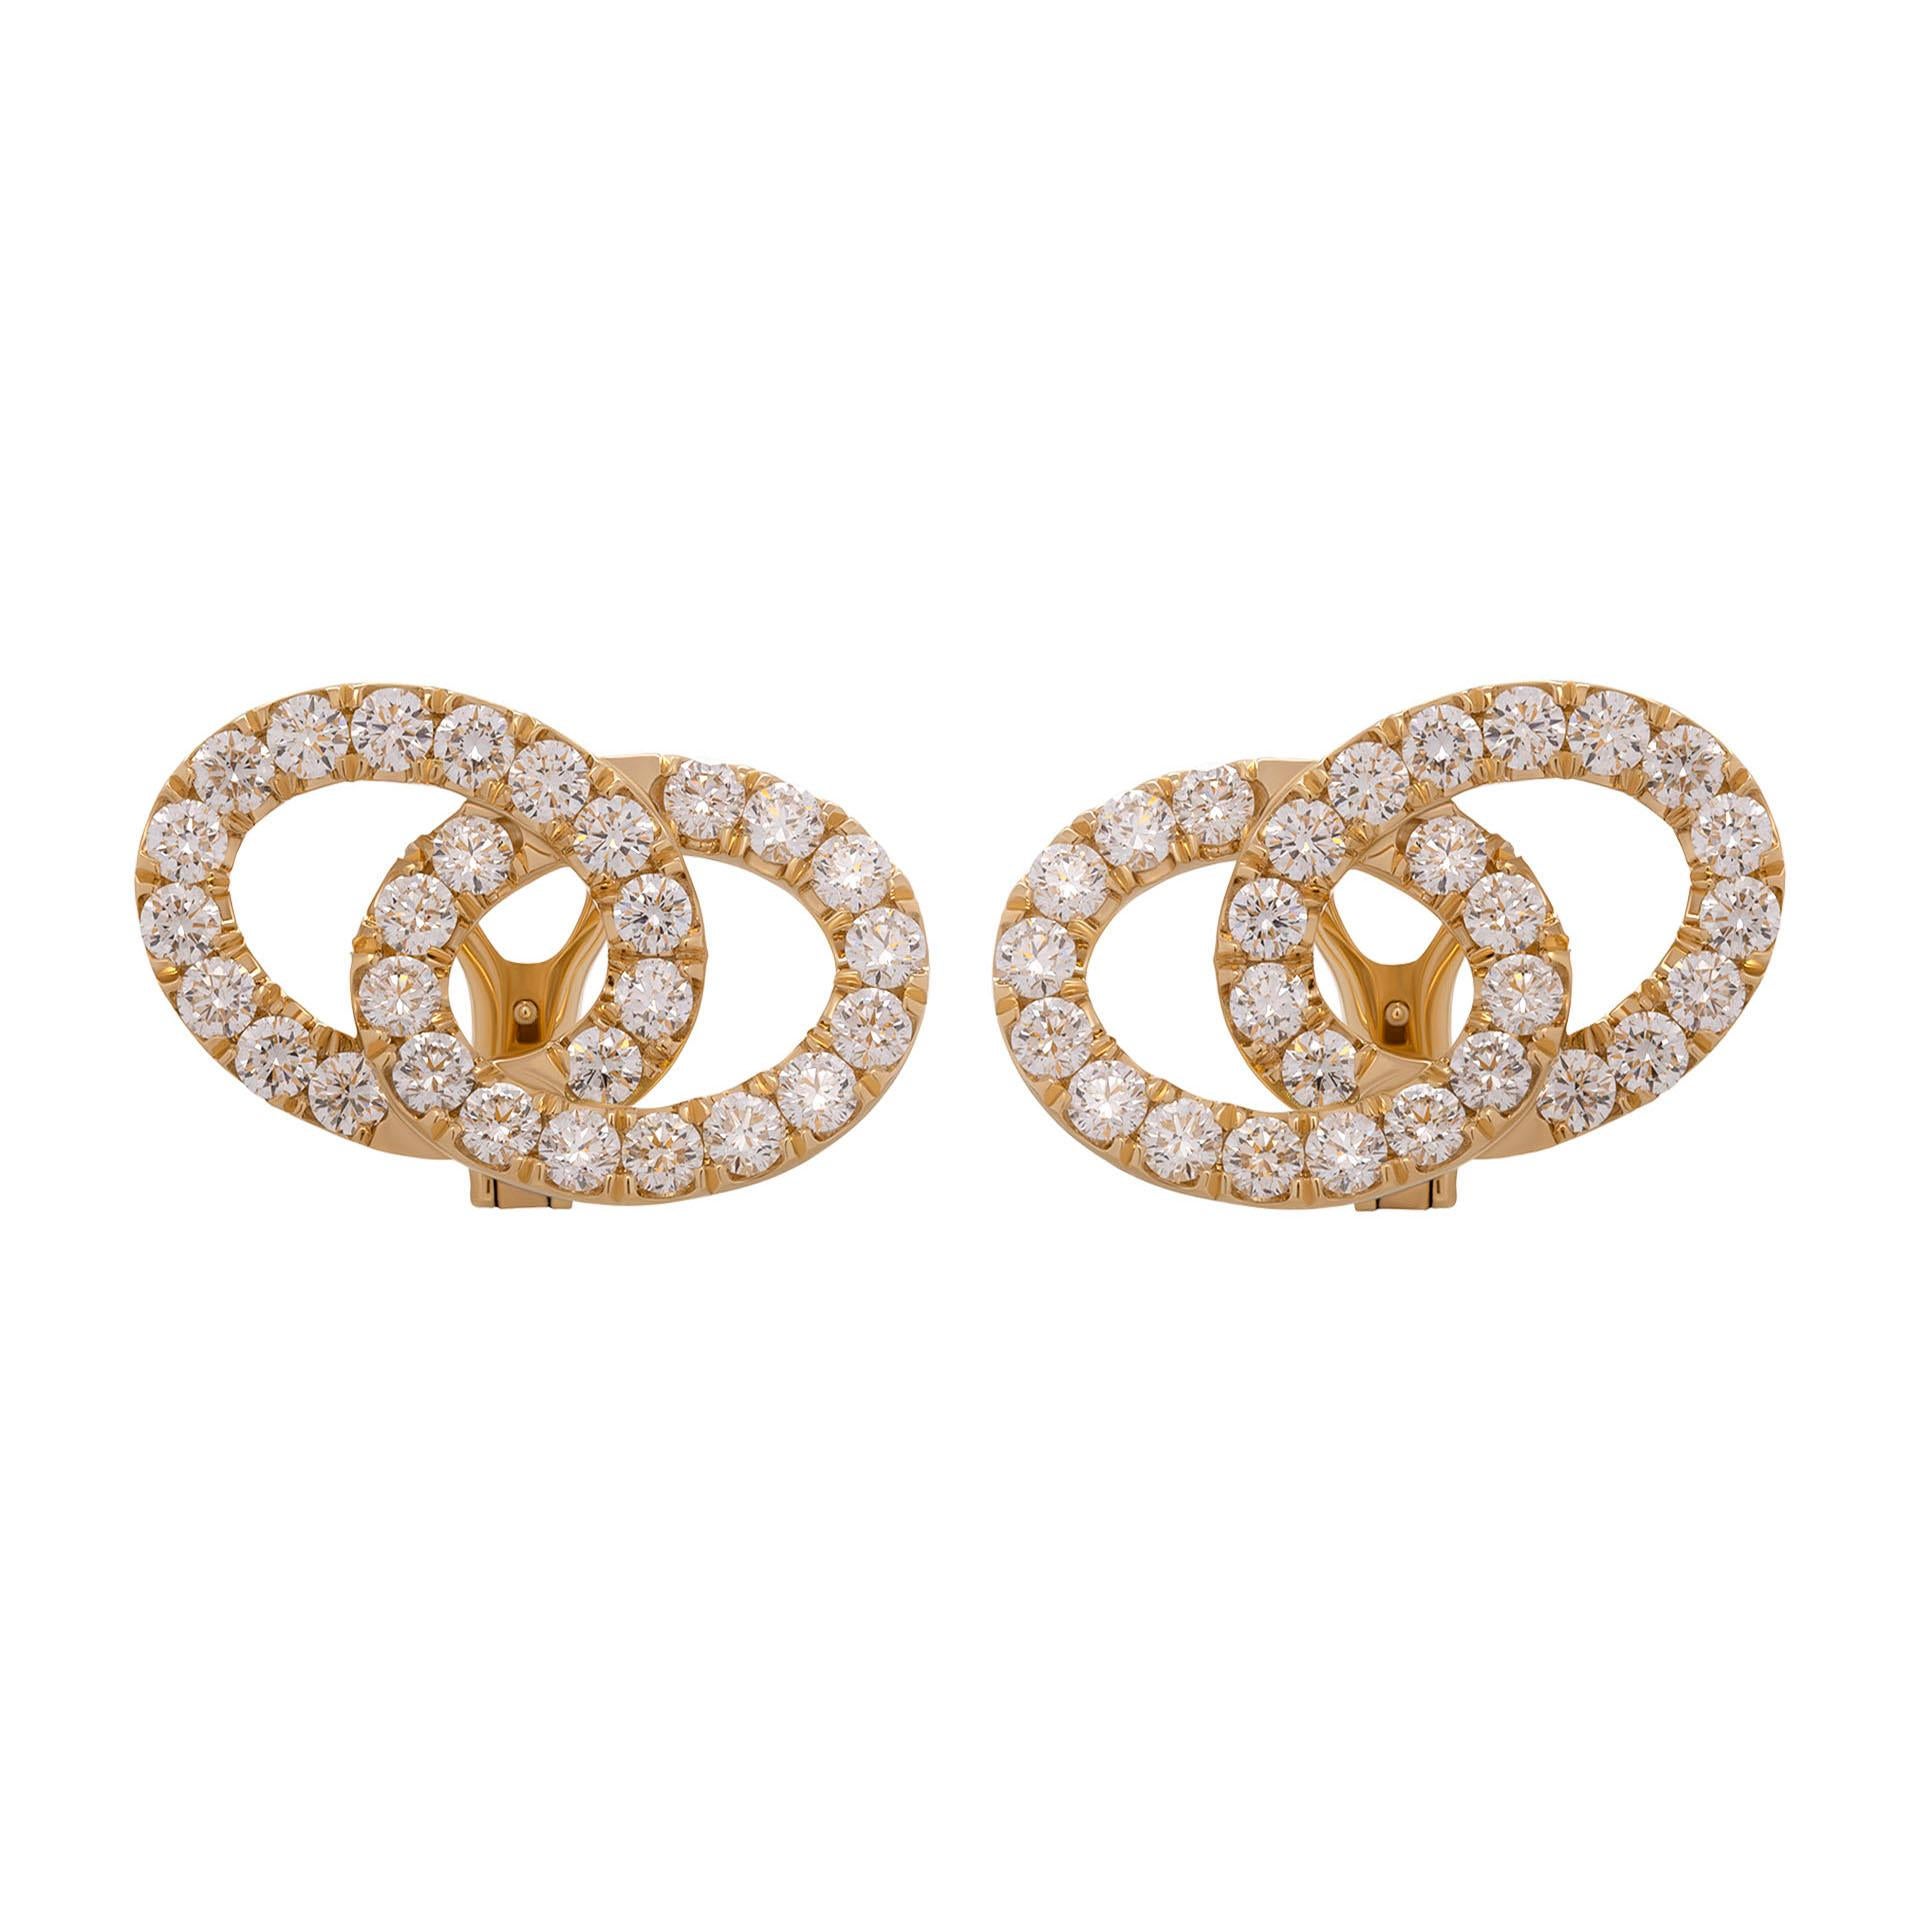 Double Circle Overlap Earrings with diamonds in 18K Yellow Gold
with 56 diamonds 3.1mm each totaling 6.87 carat, 
F-G color VVS-VS clarity 
